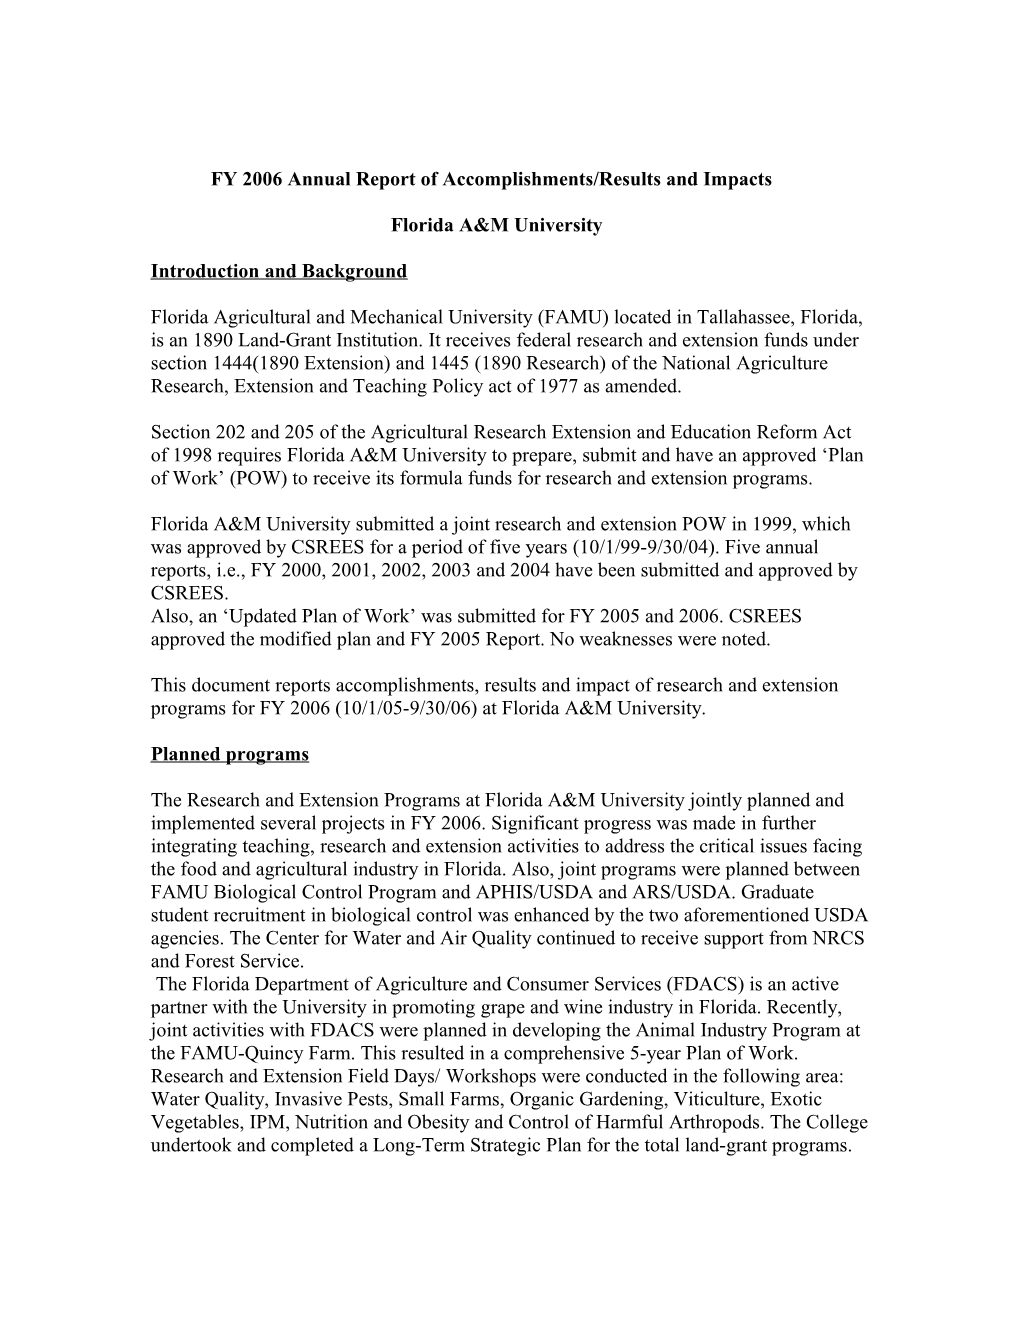 FY 2004 Annual Report of Accomplishments/Results and Impact s1